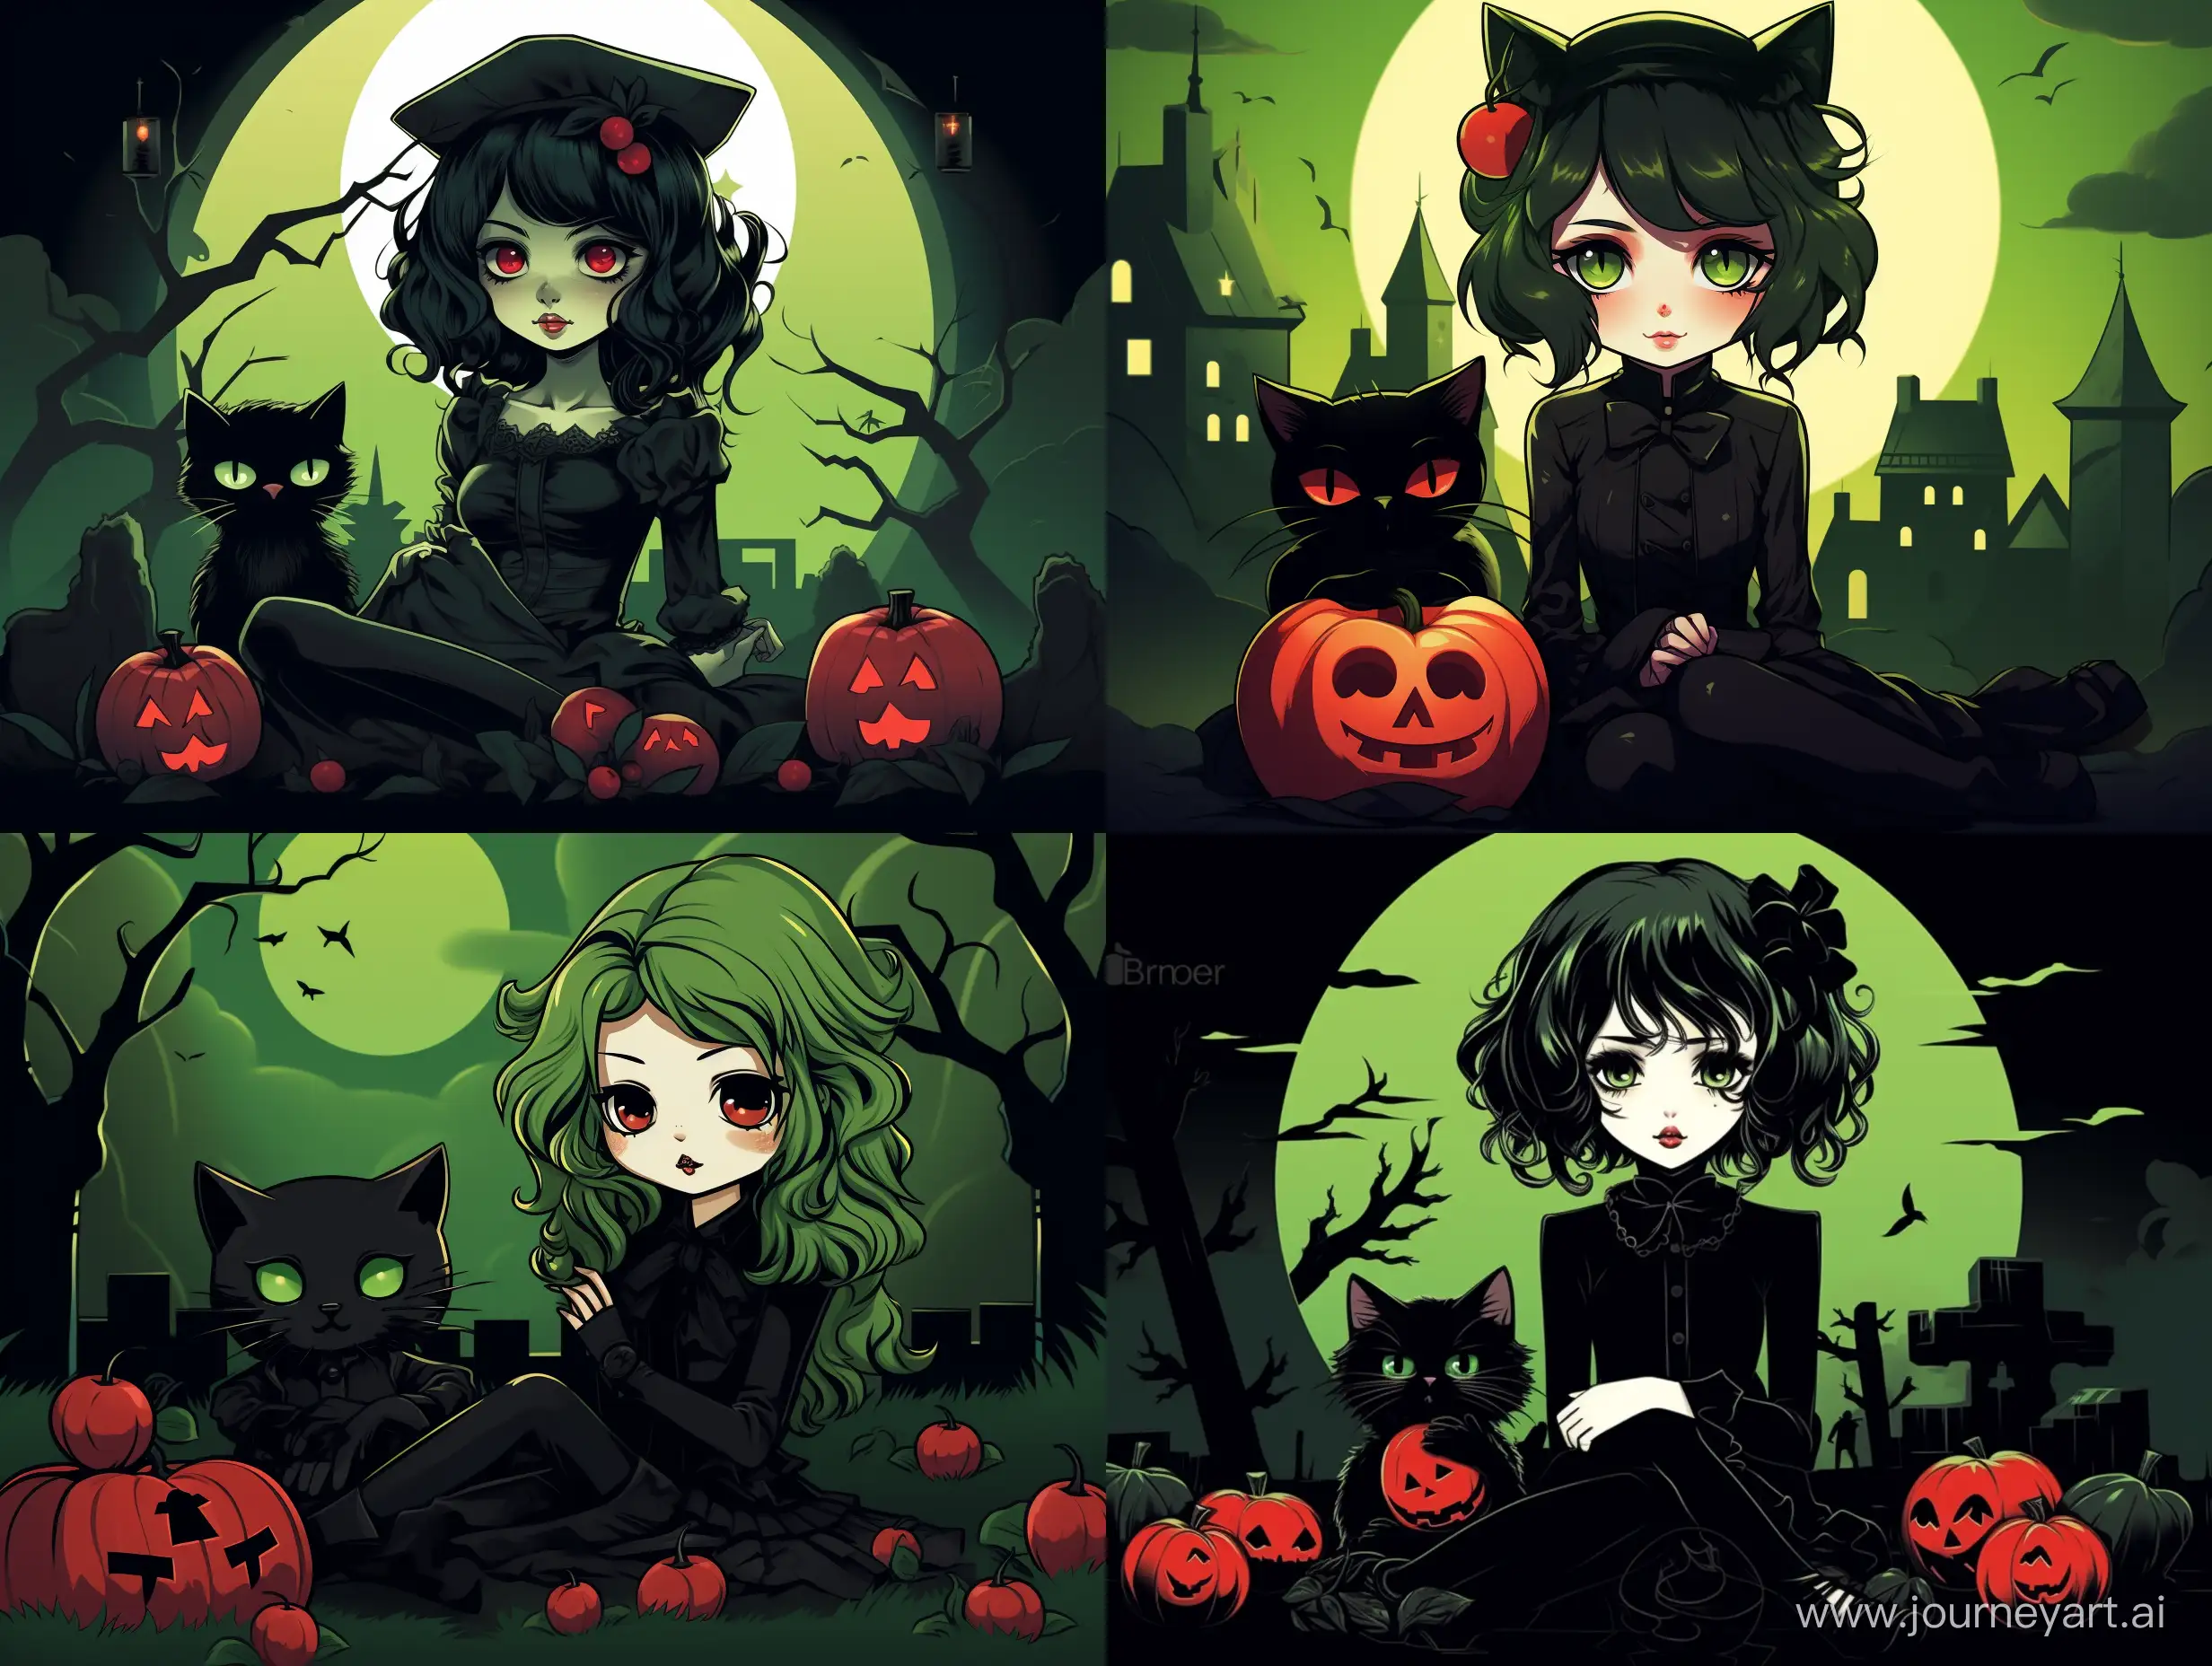 Charming-Anime-Witch-with-Melancholic-Expression-Holding-Green-Apple-in-Graveyard